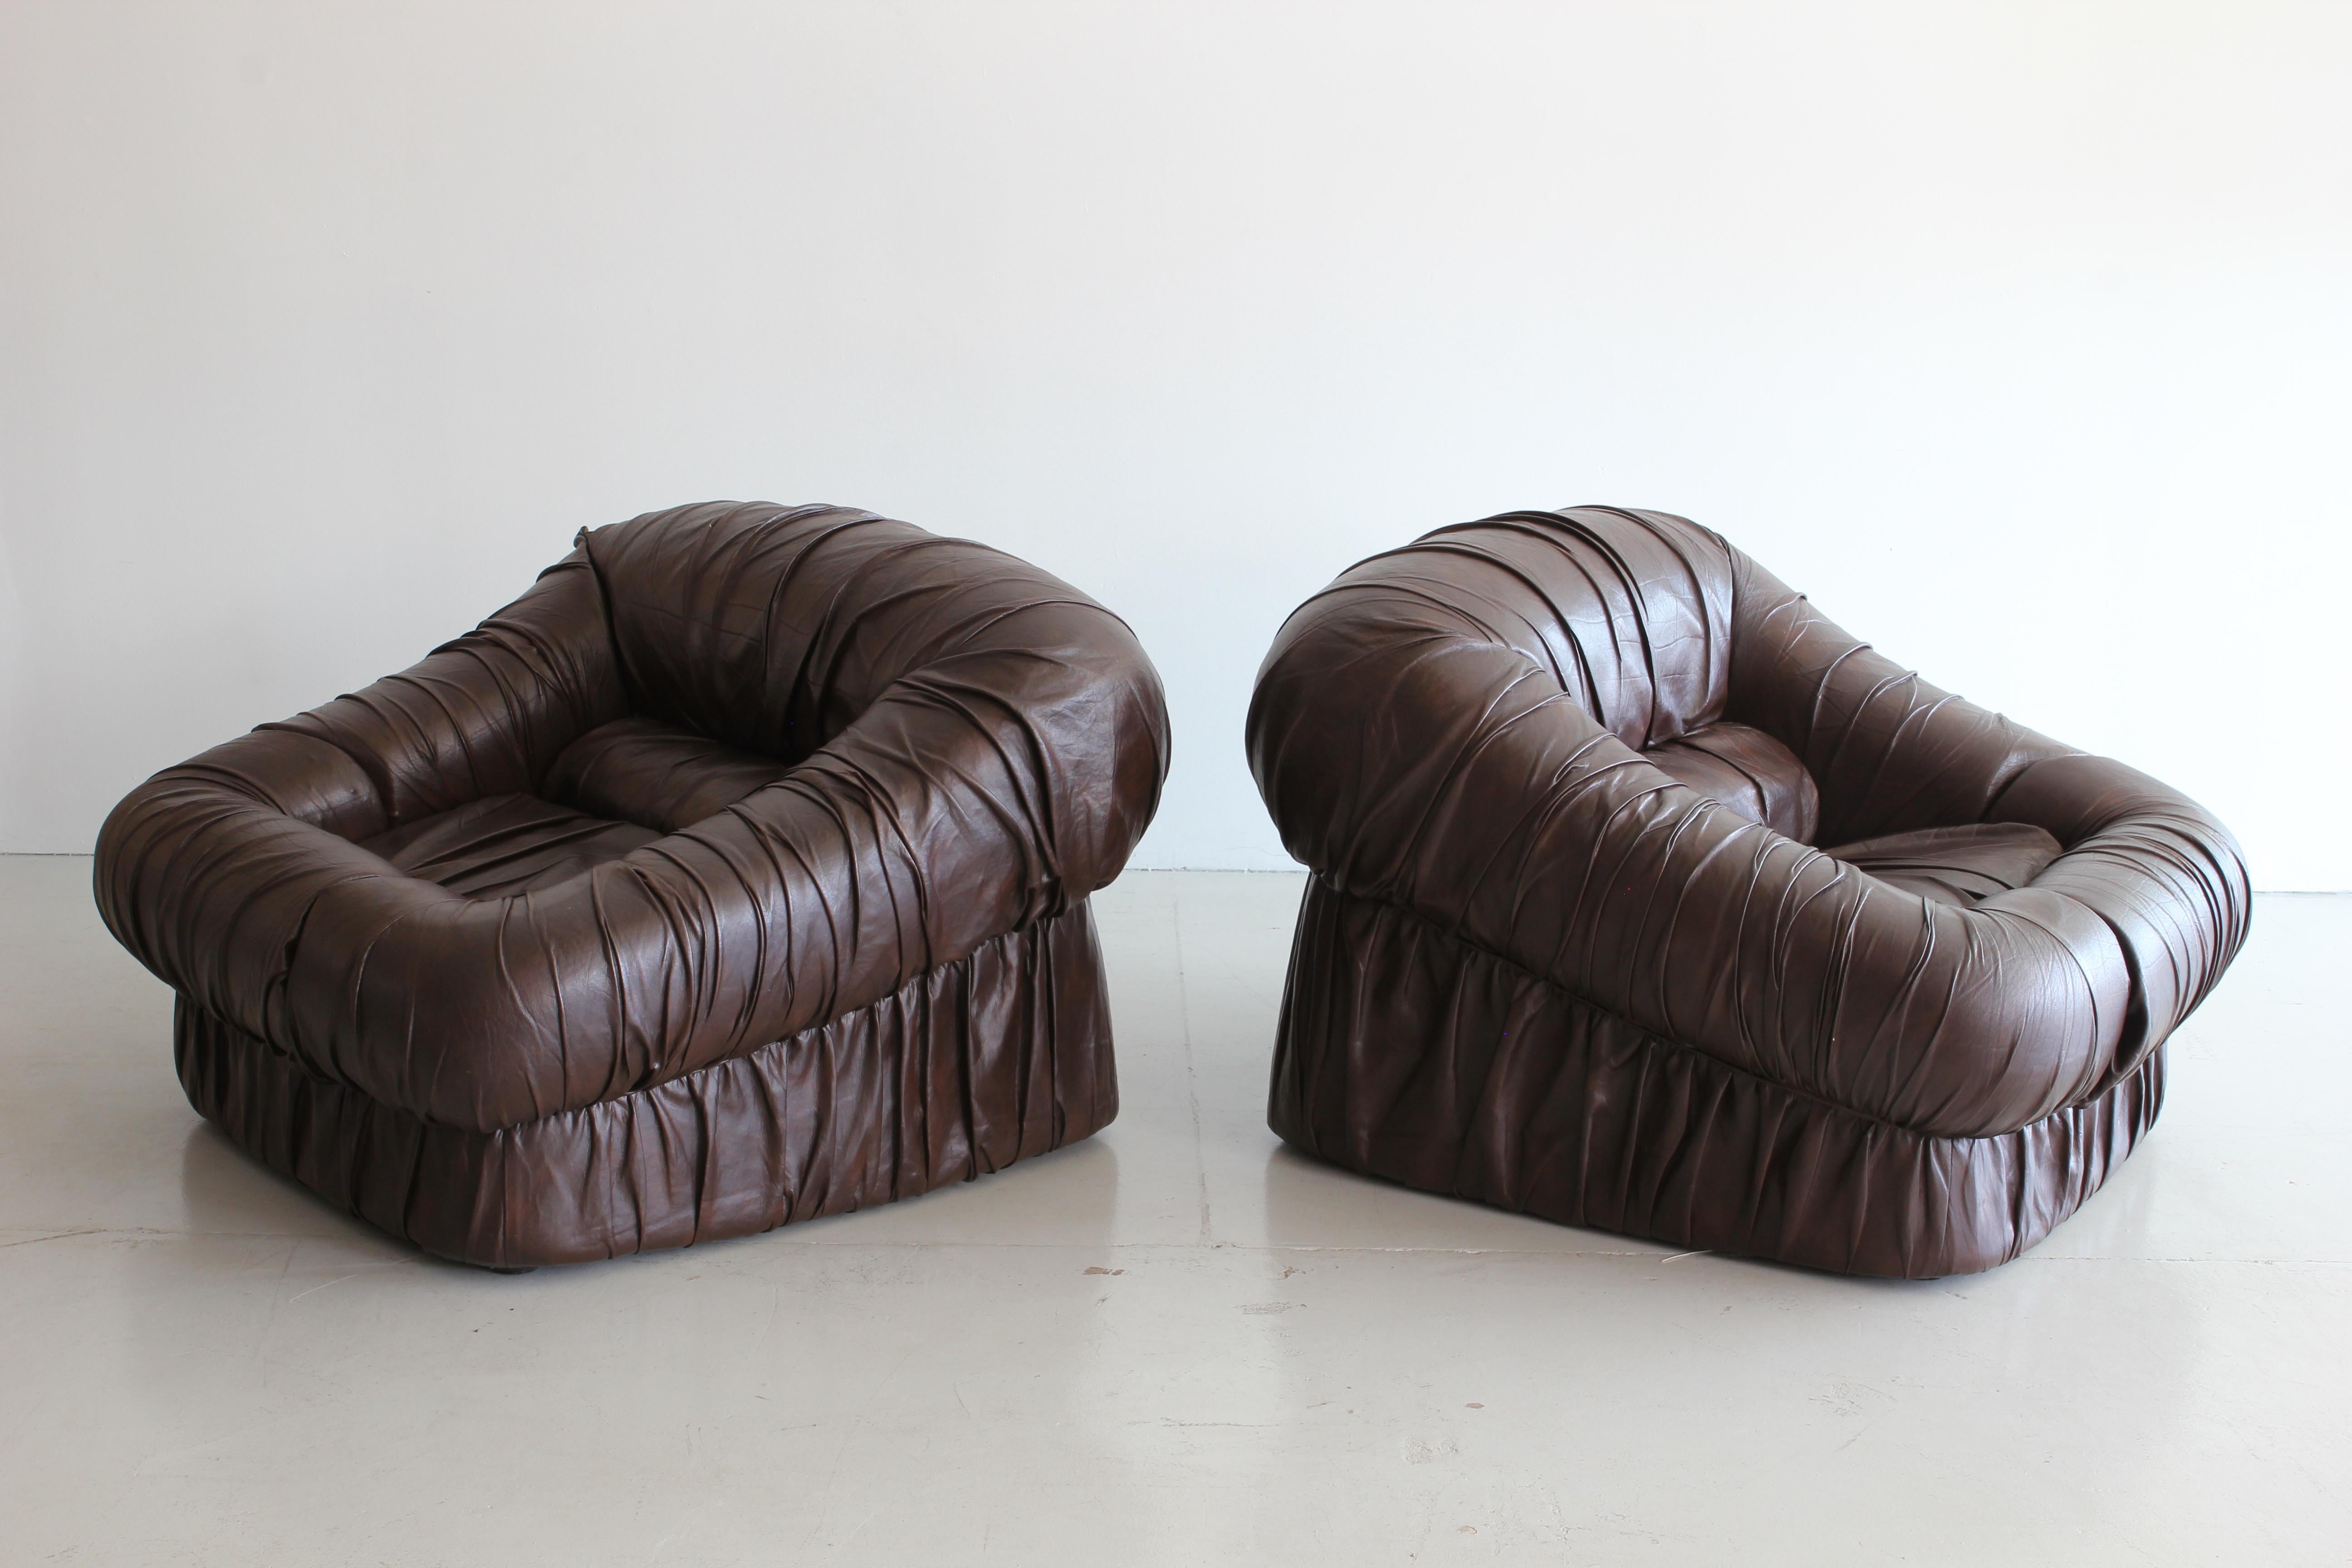 Late 20th Century Pair of Leather Club Chairs by De Pas, D'urbino and Lomazzi